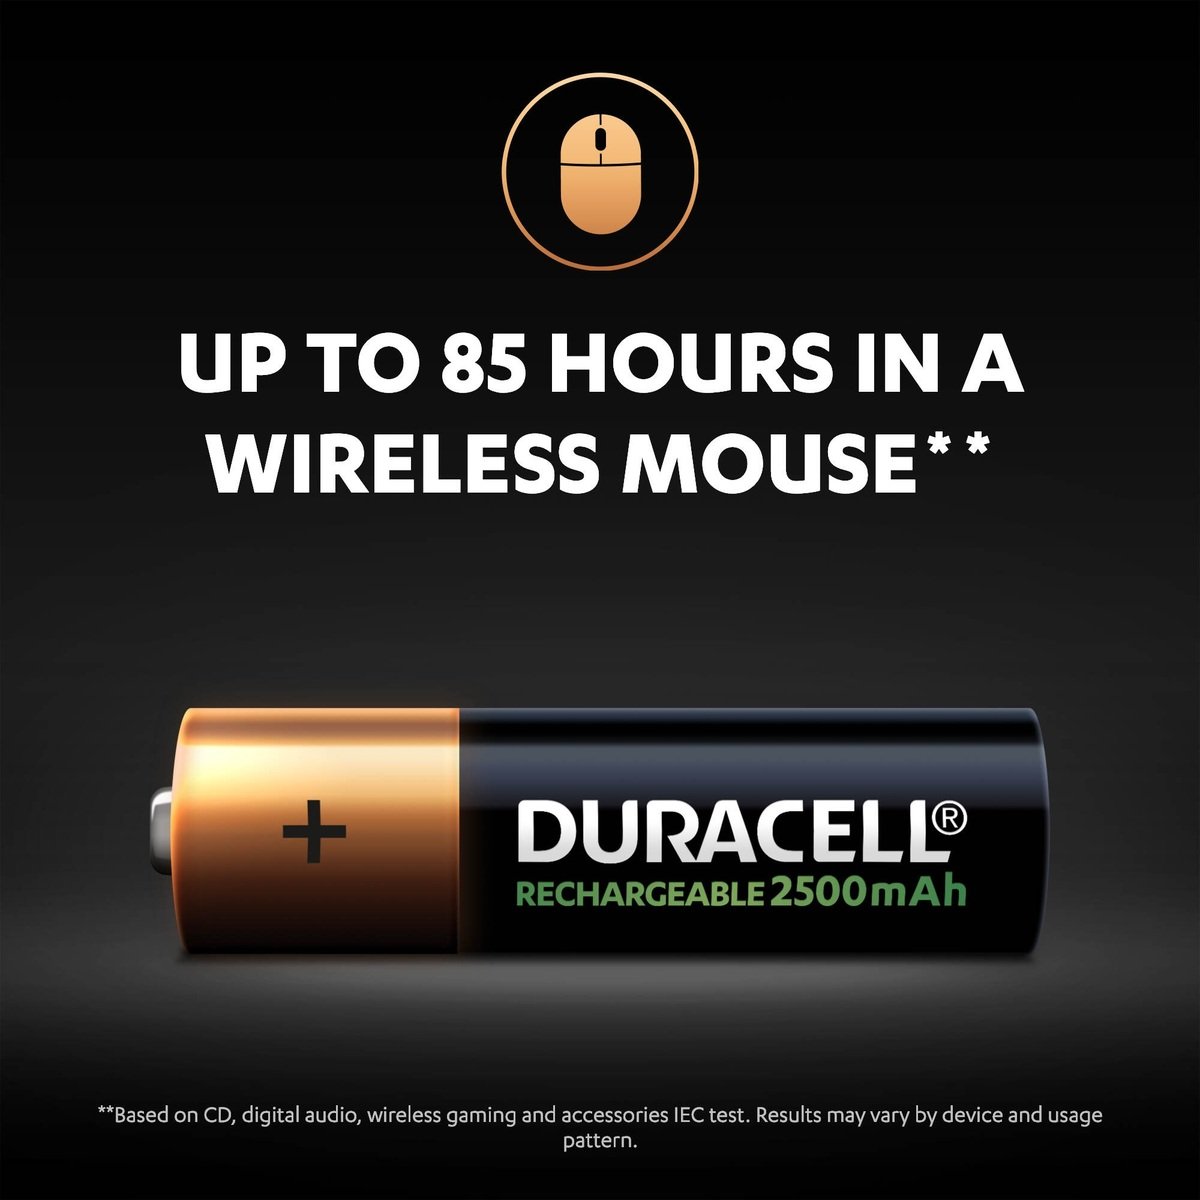 Duracell Rechargeable AA 2500mAh batteries, pack of 4